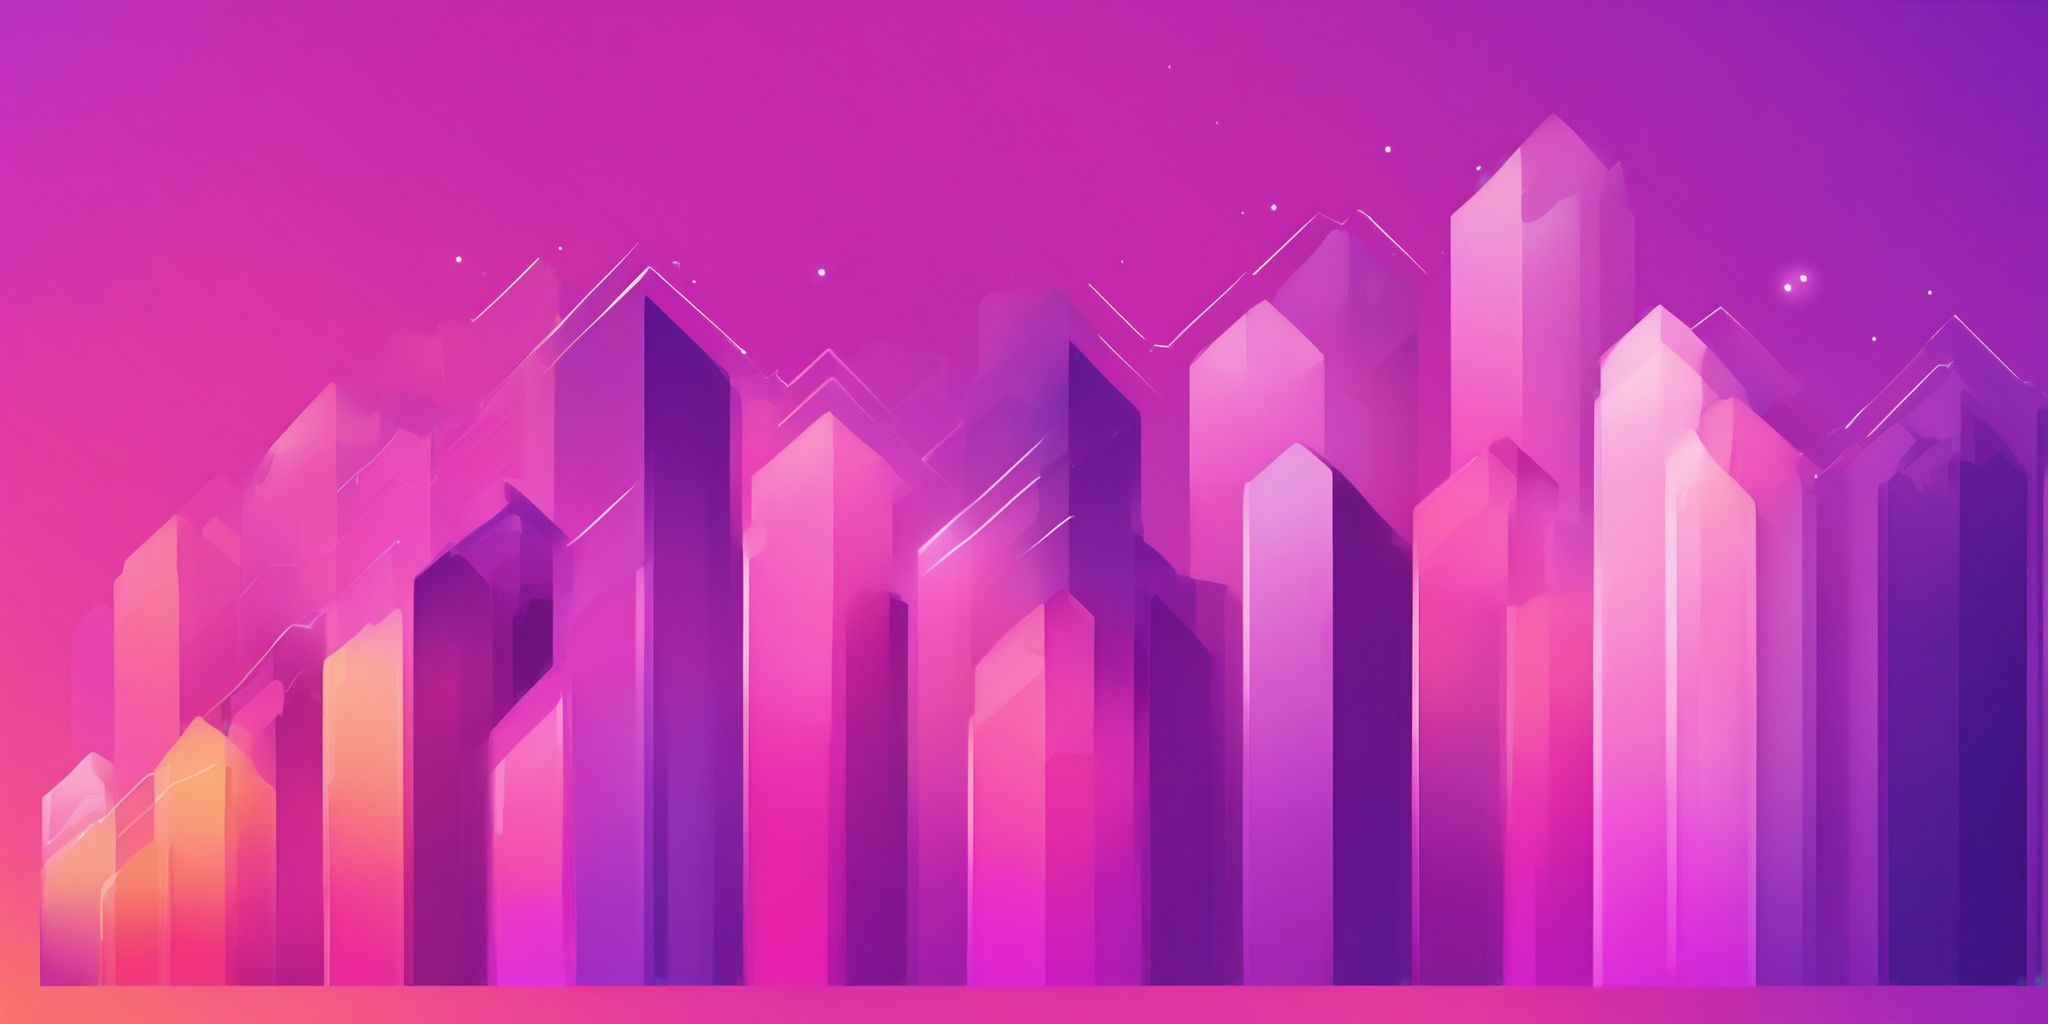 Ranking in flat illustration style, colorful purple gradient colors